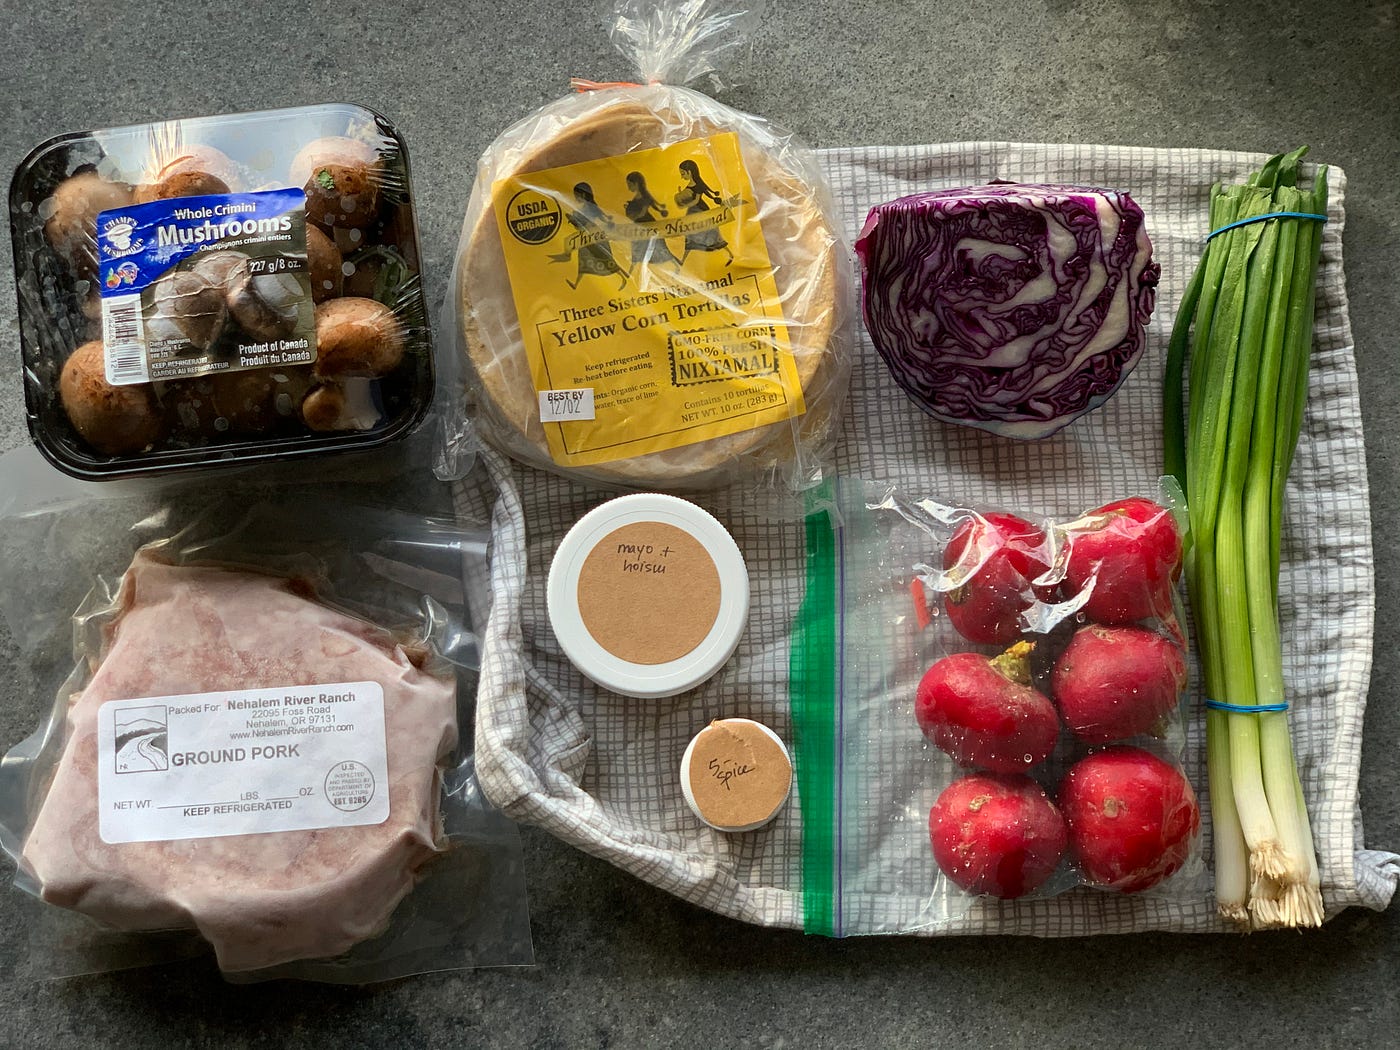 We Tried HelloFresh's New Store-Bought Meal Kit